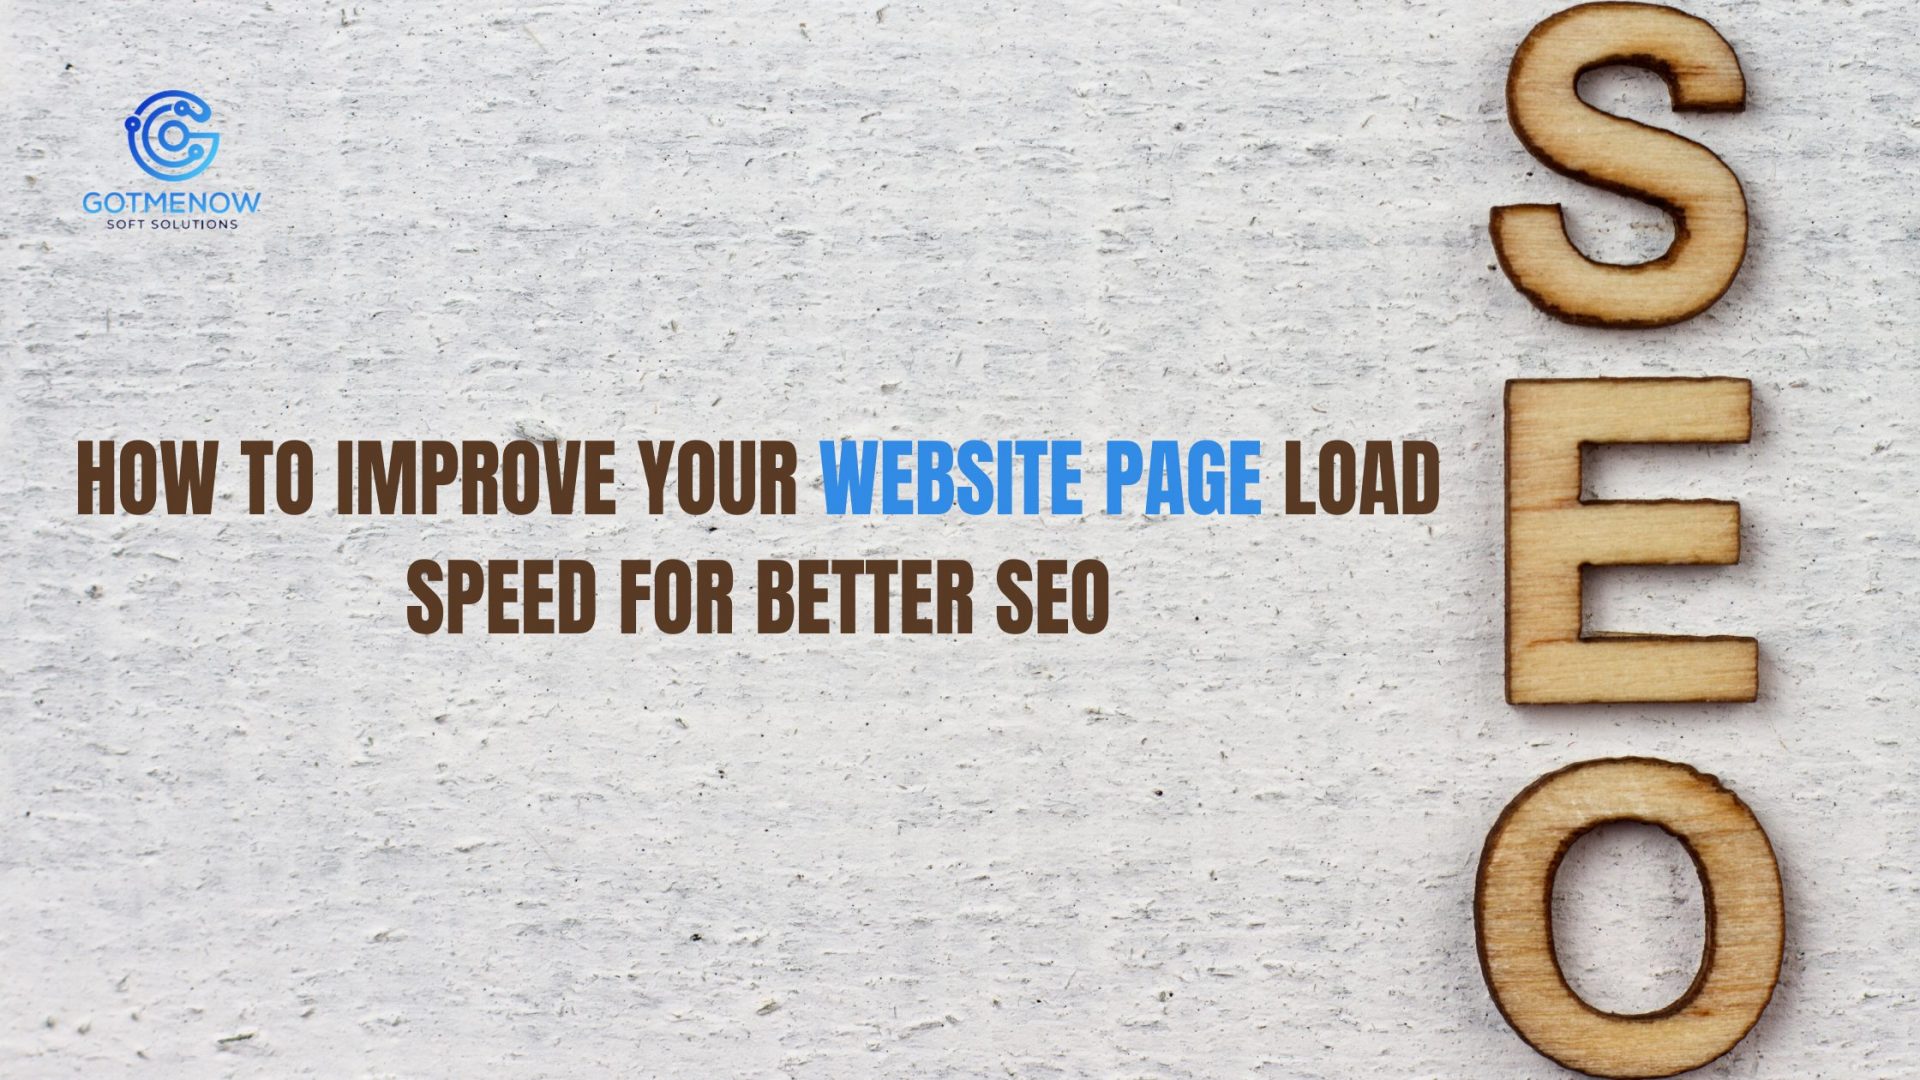 How to Improve Your Website Page Load Speed for Better SEO